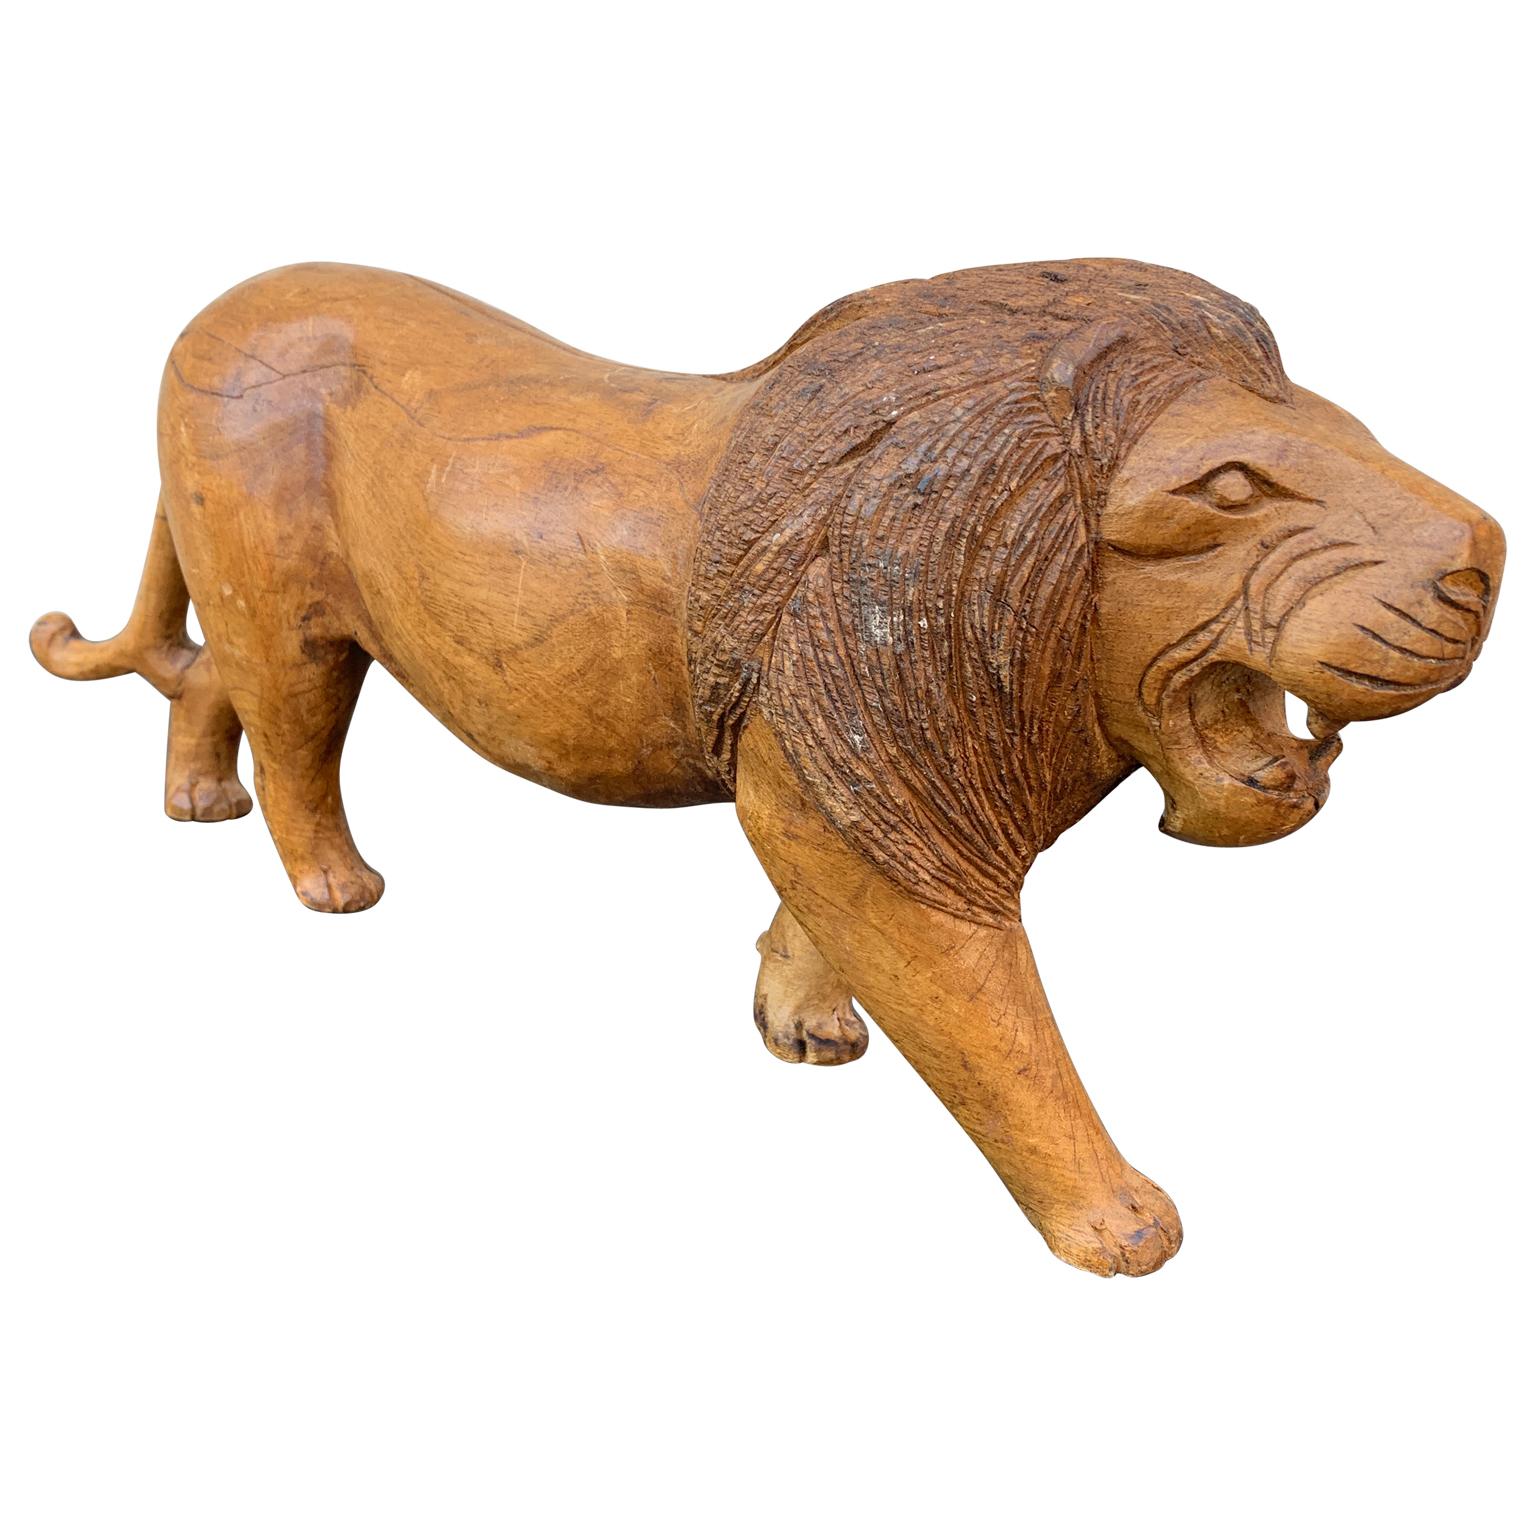 An Scandinavian wooden sculpture of a lion, hand made and painted in the early 1900's.